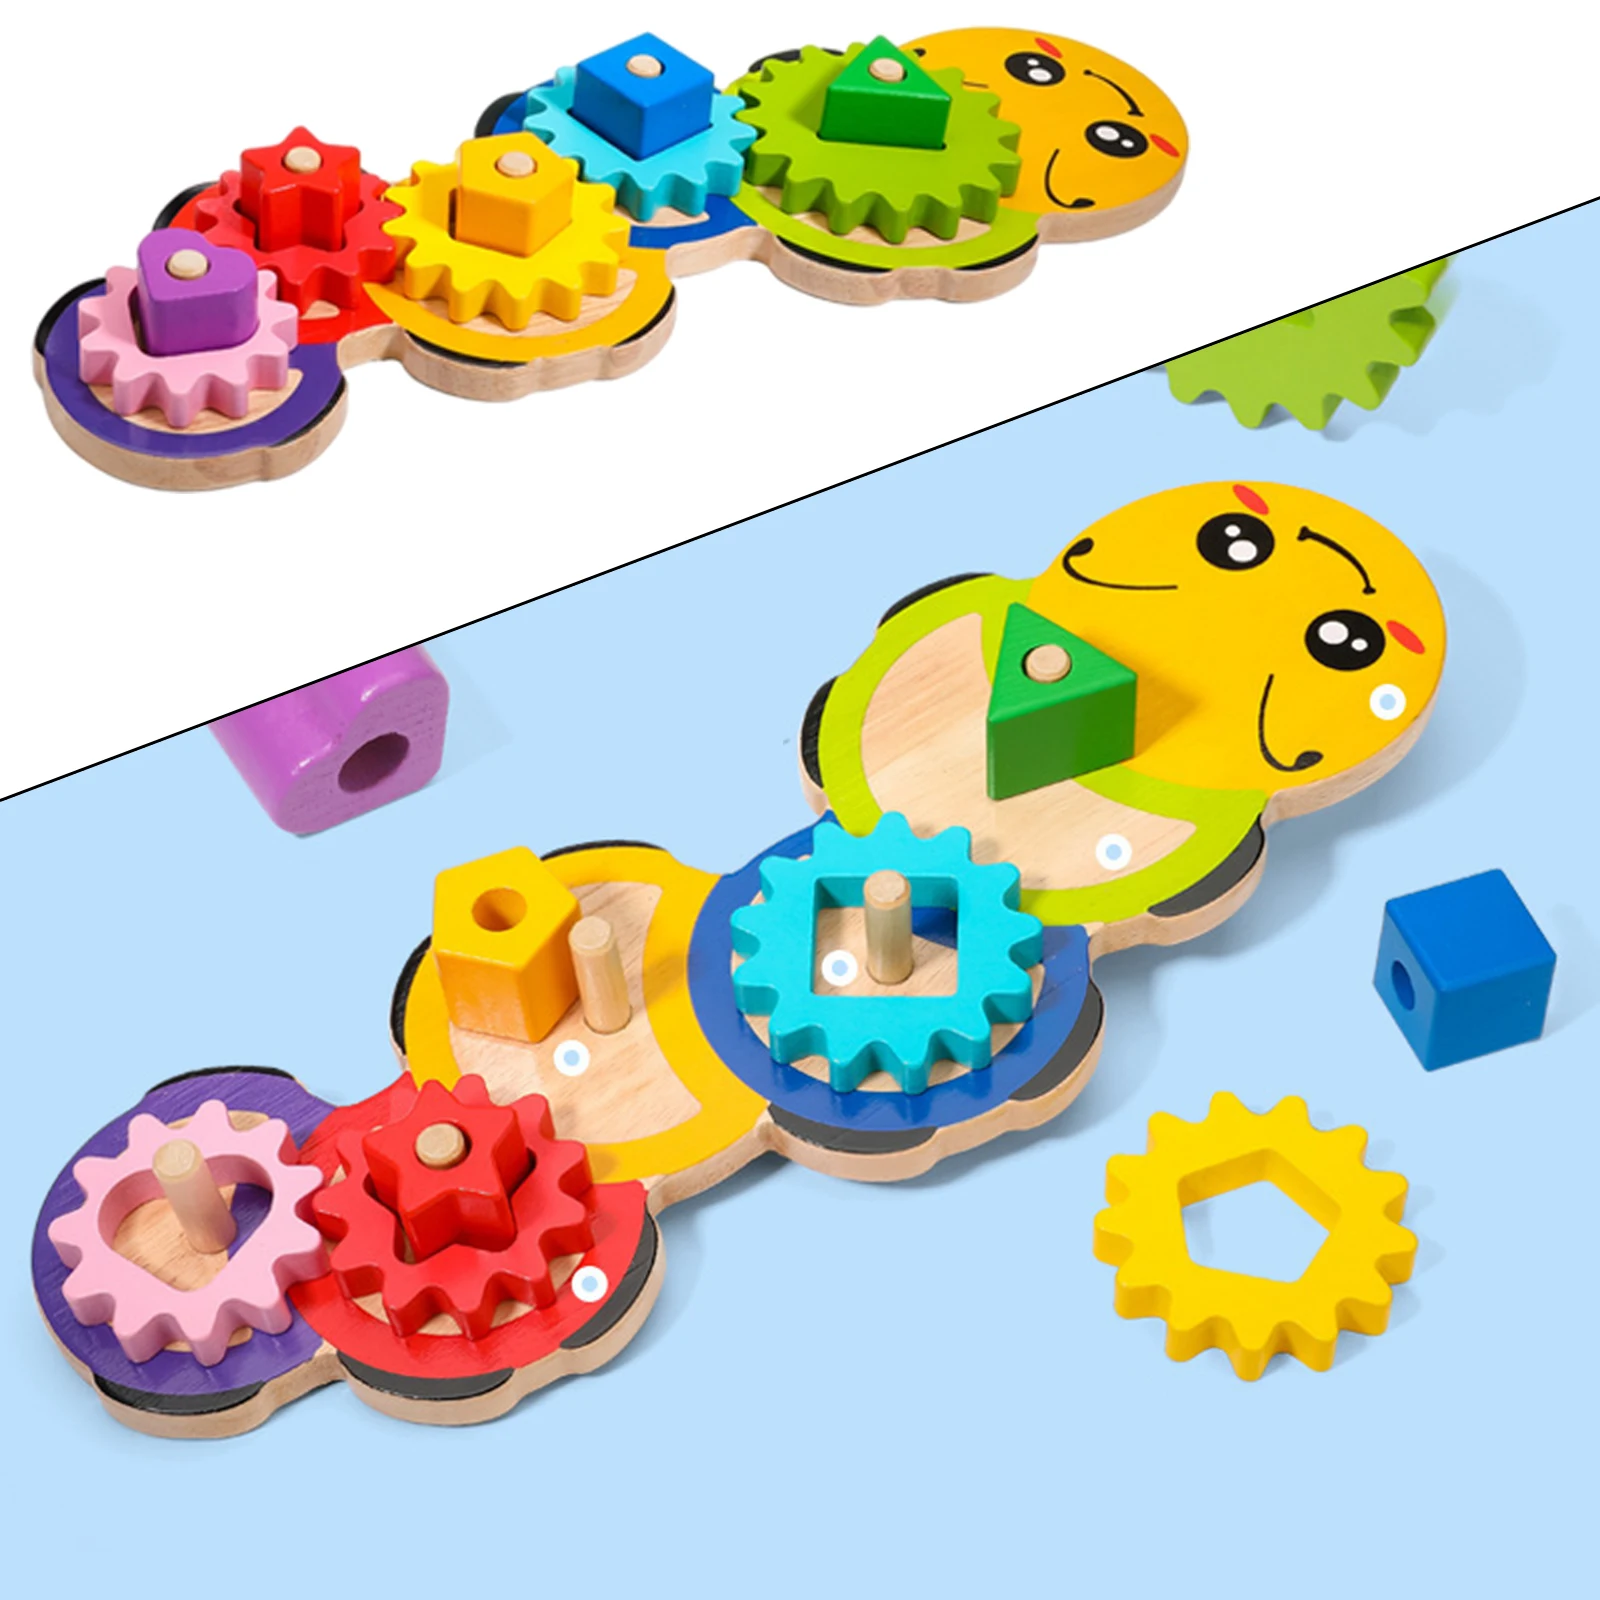 Educational Building Blocks Gear Toy Assembly Caterpillar Age 3+ Toddlers Early Learning Preschool Sorting Gifts